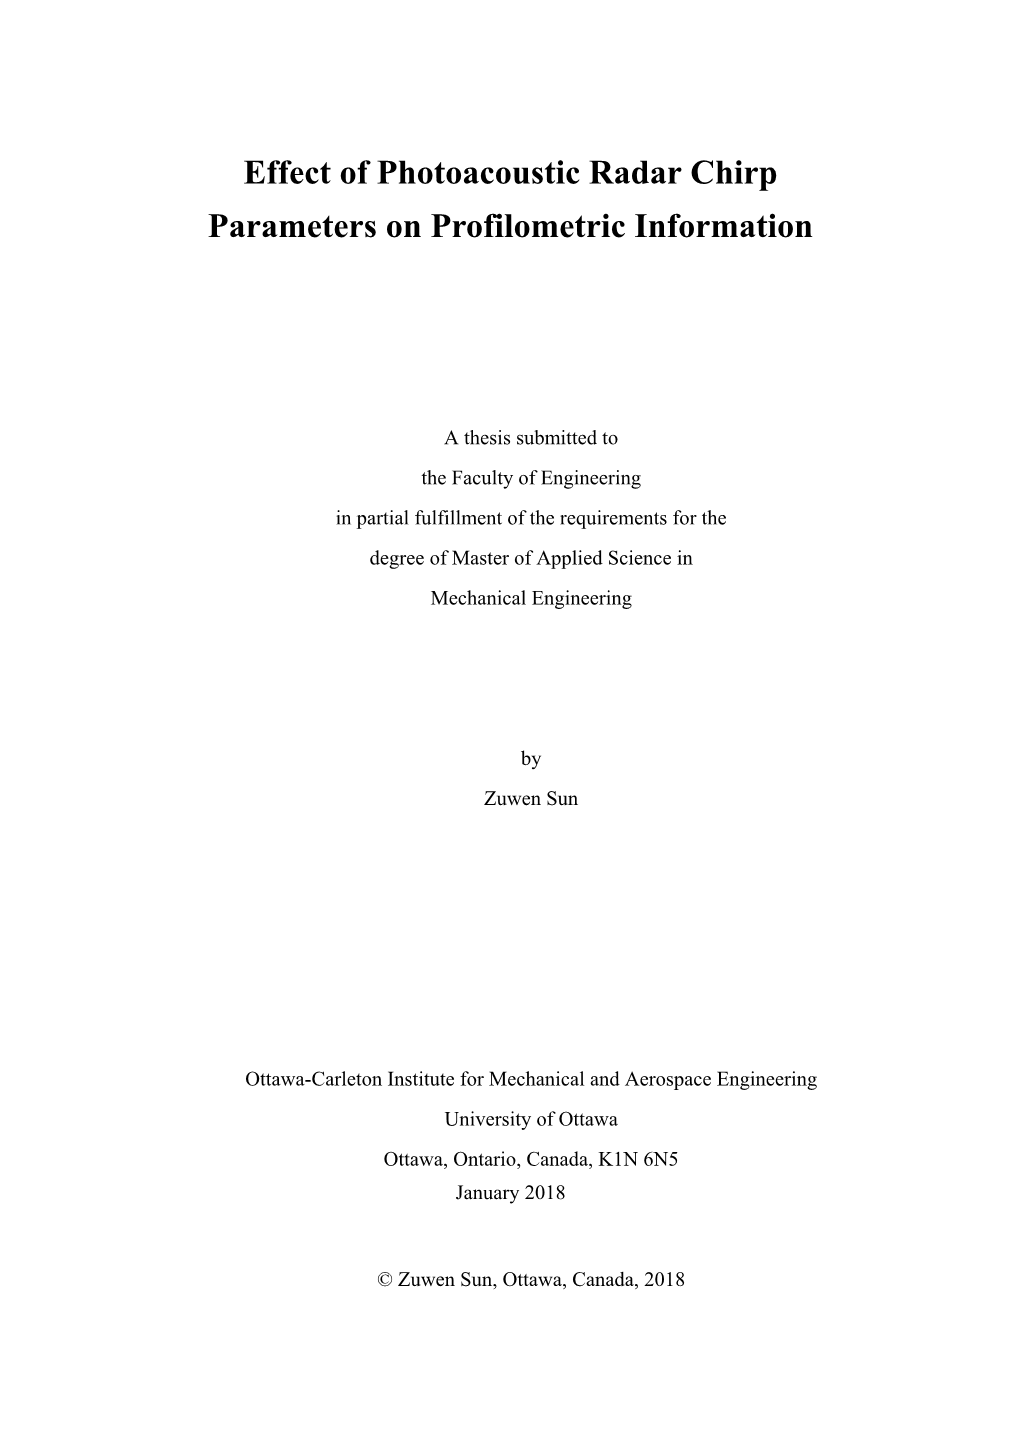 Effect of Photoacoustic Radar Chirp Parameters on Profilometric Information